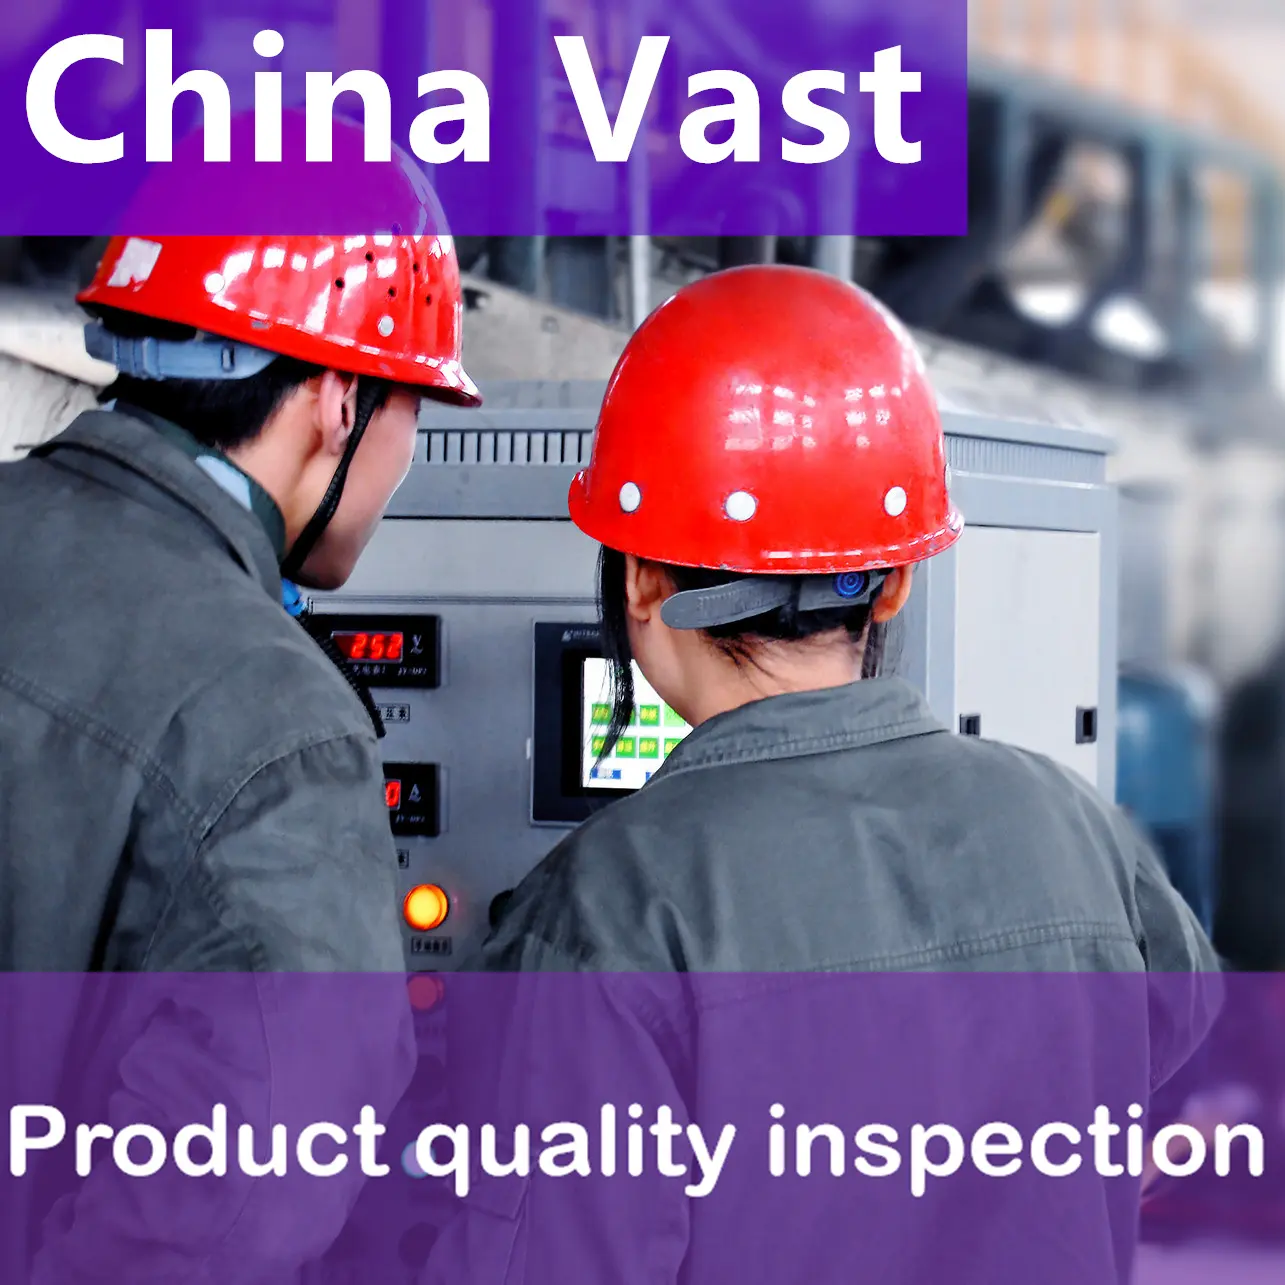 Products inspection service and quality control inspection service Shenzhen random inspection